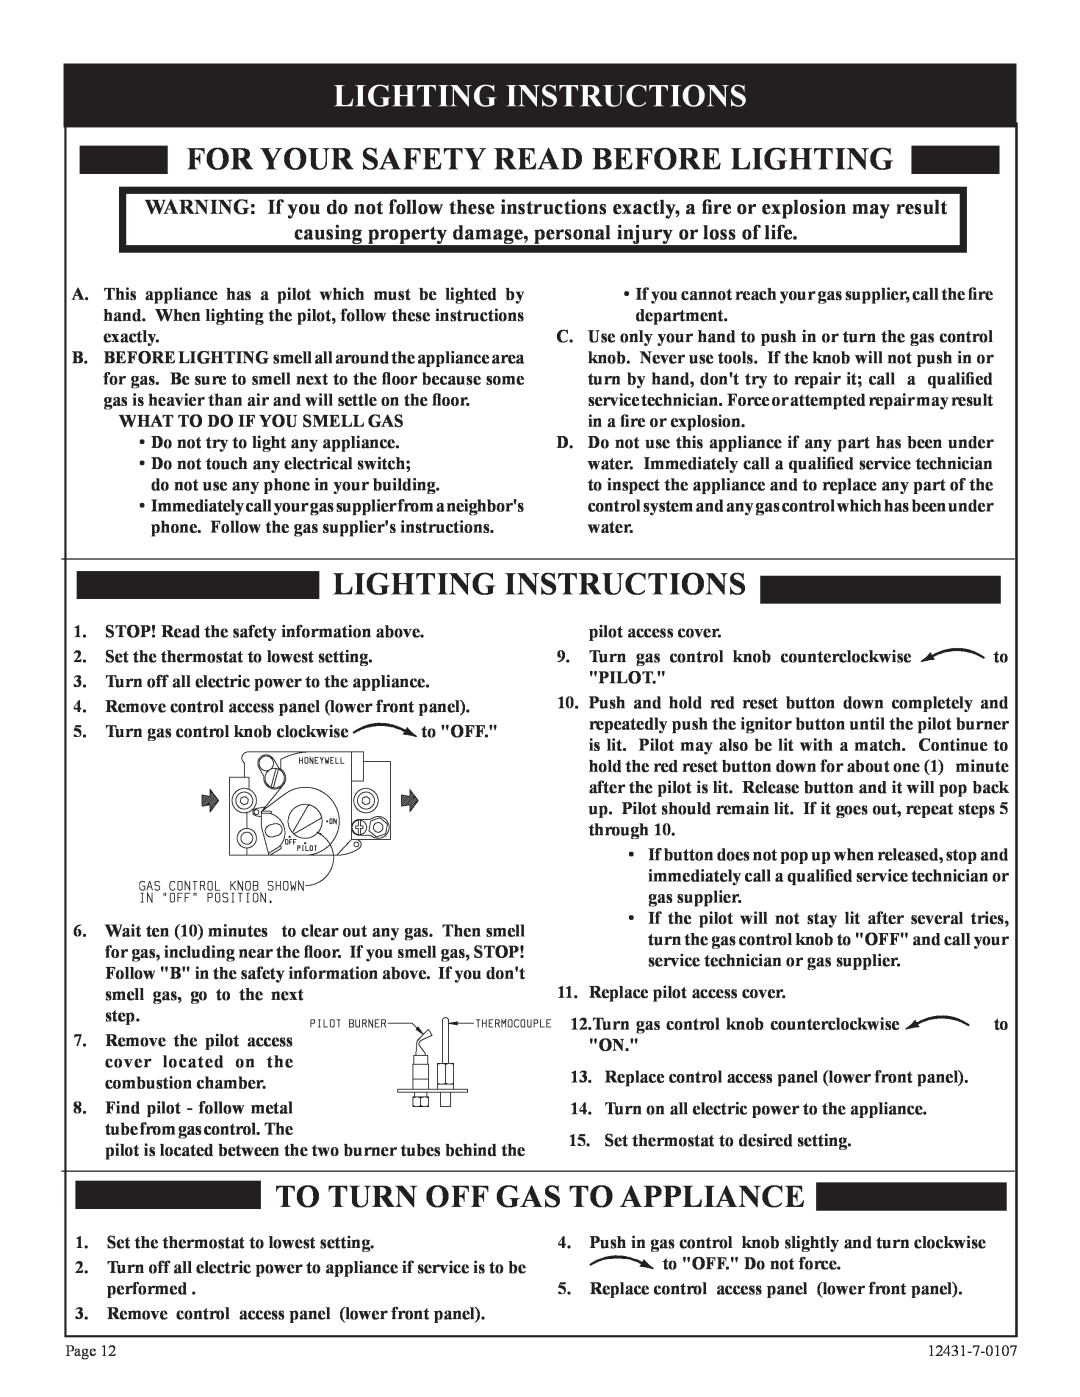 Langley/Empire DV-55SPP Lighting Instructions, For Your Safety Read Before Lighting, To Turn Off Gas To Appliance 